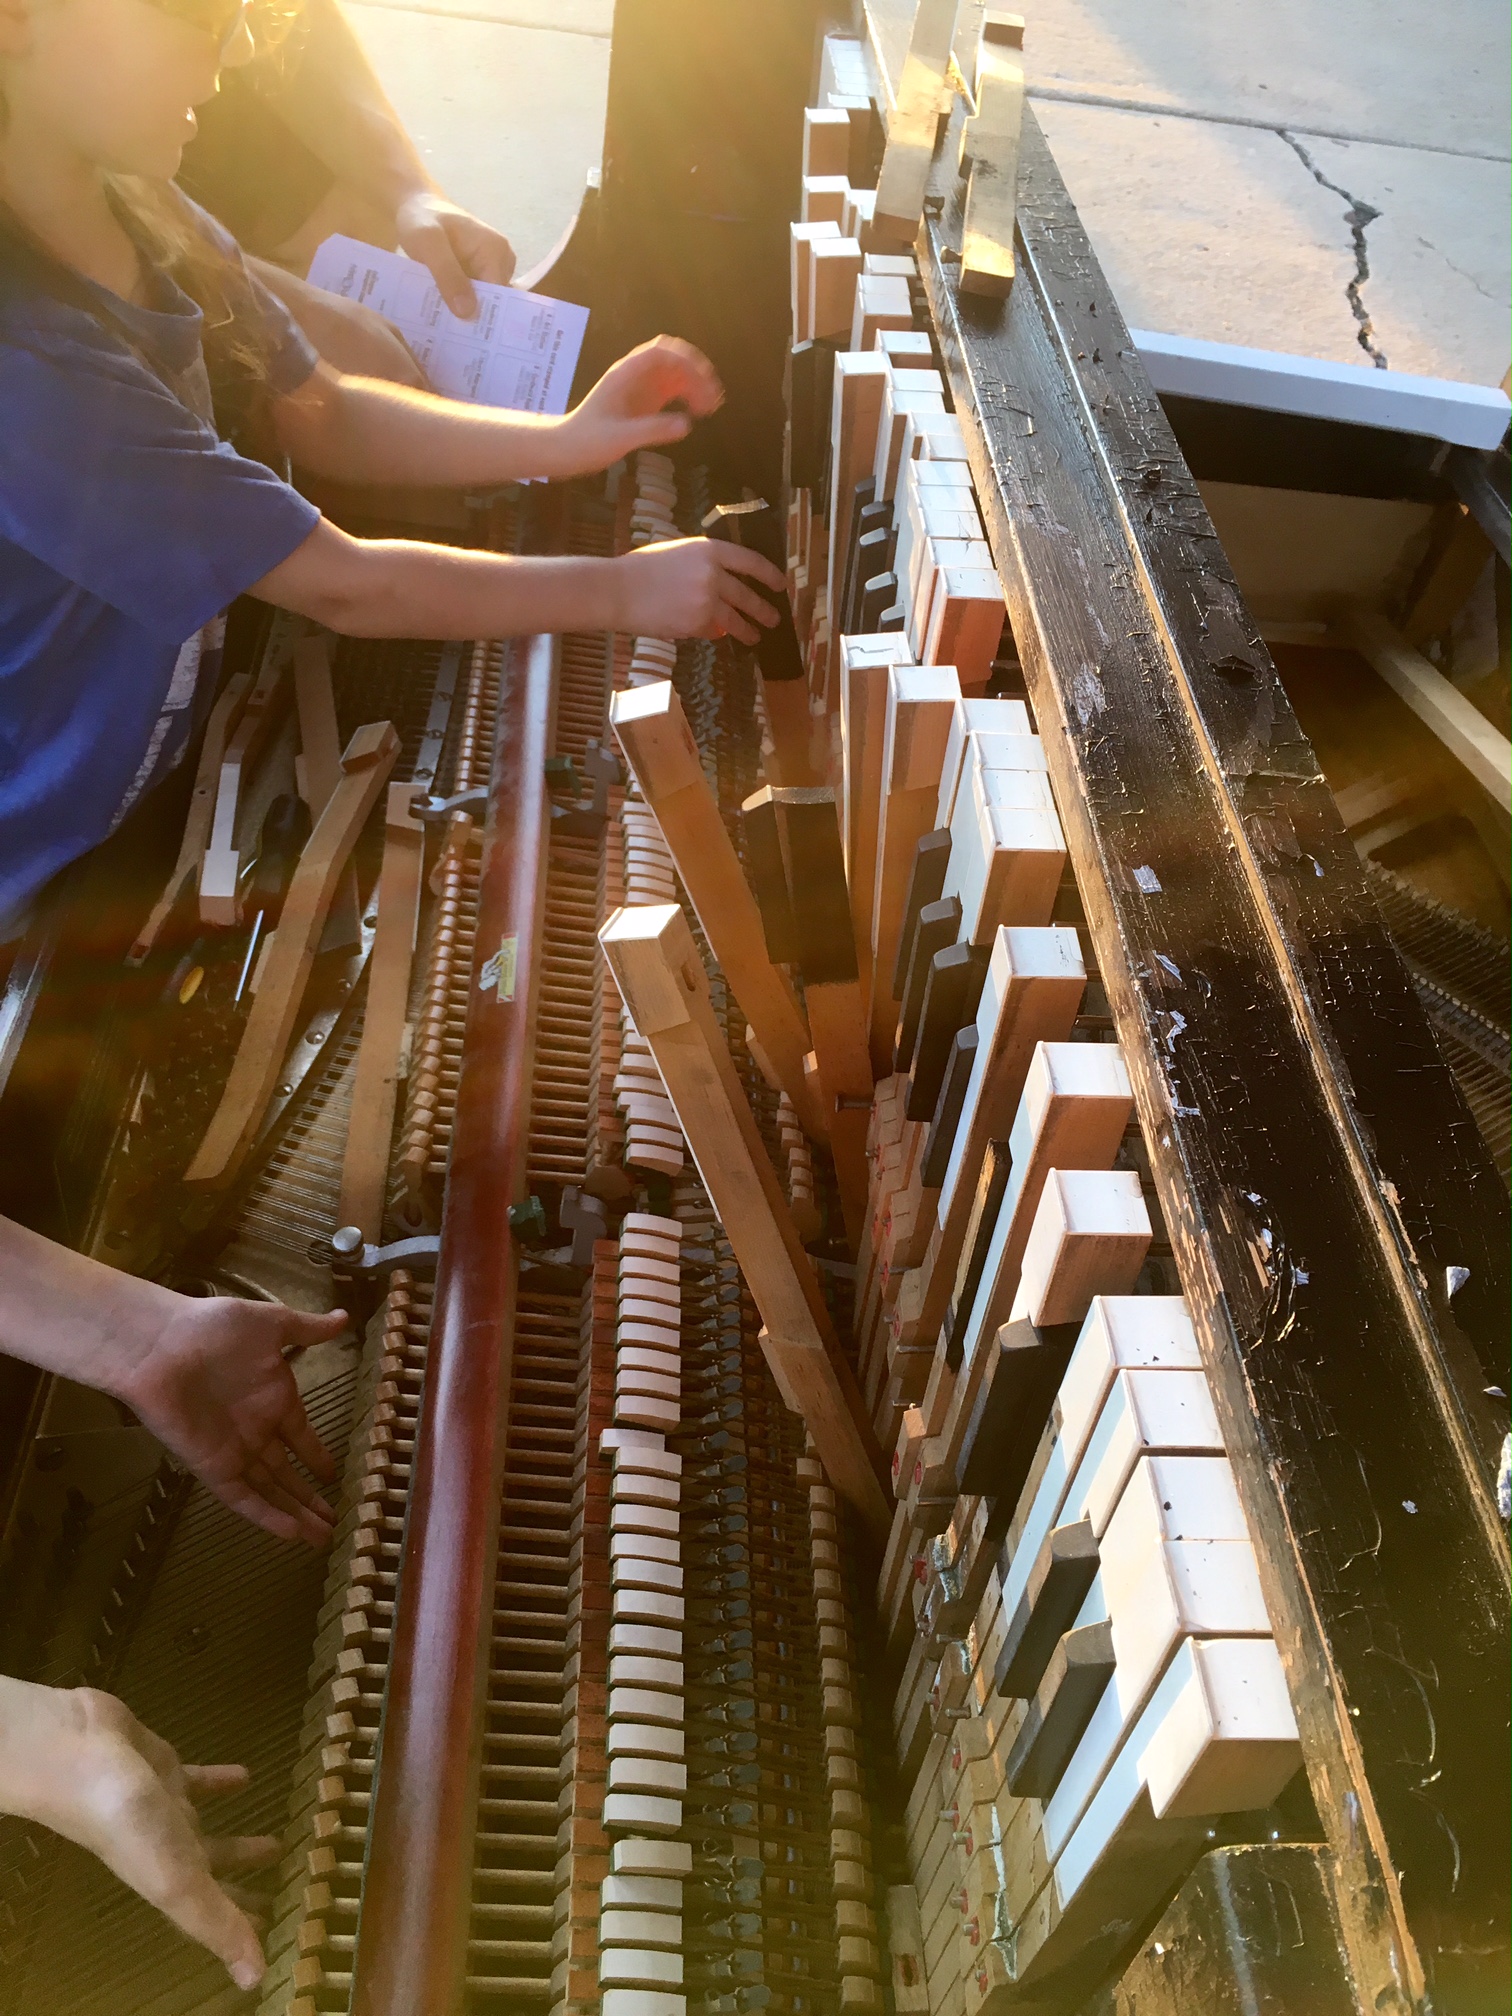 Disassembling the piano to see how it works was fascinating. Photo by Kelly Tompkins